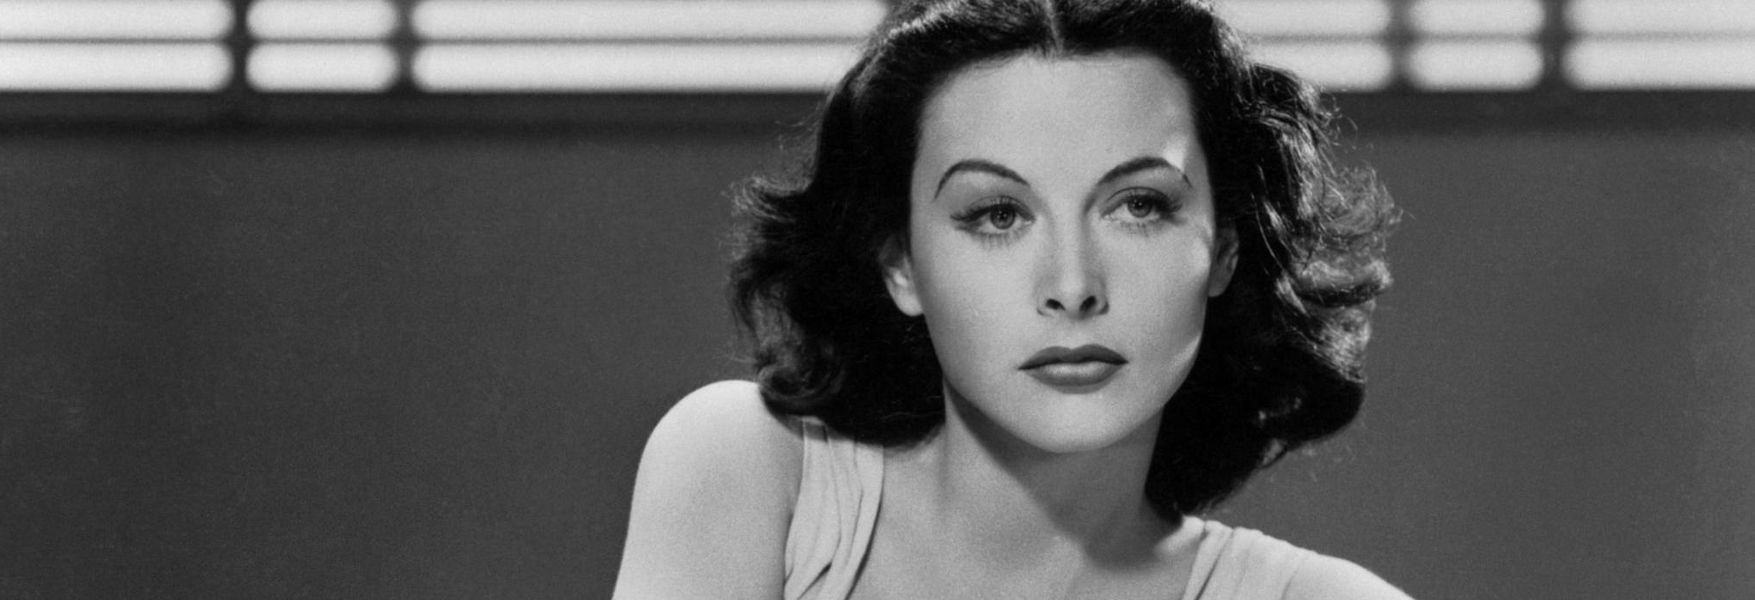 Hedy Lamarr, the Actress who Invented Wireless OpenMind.